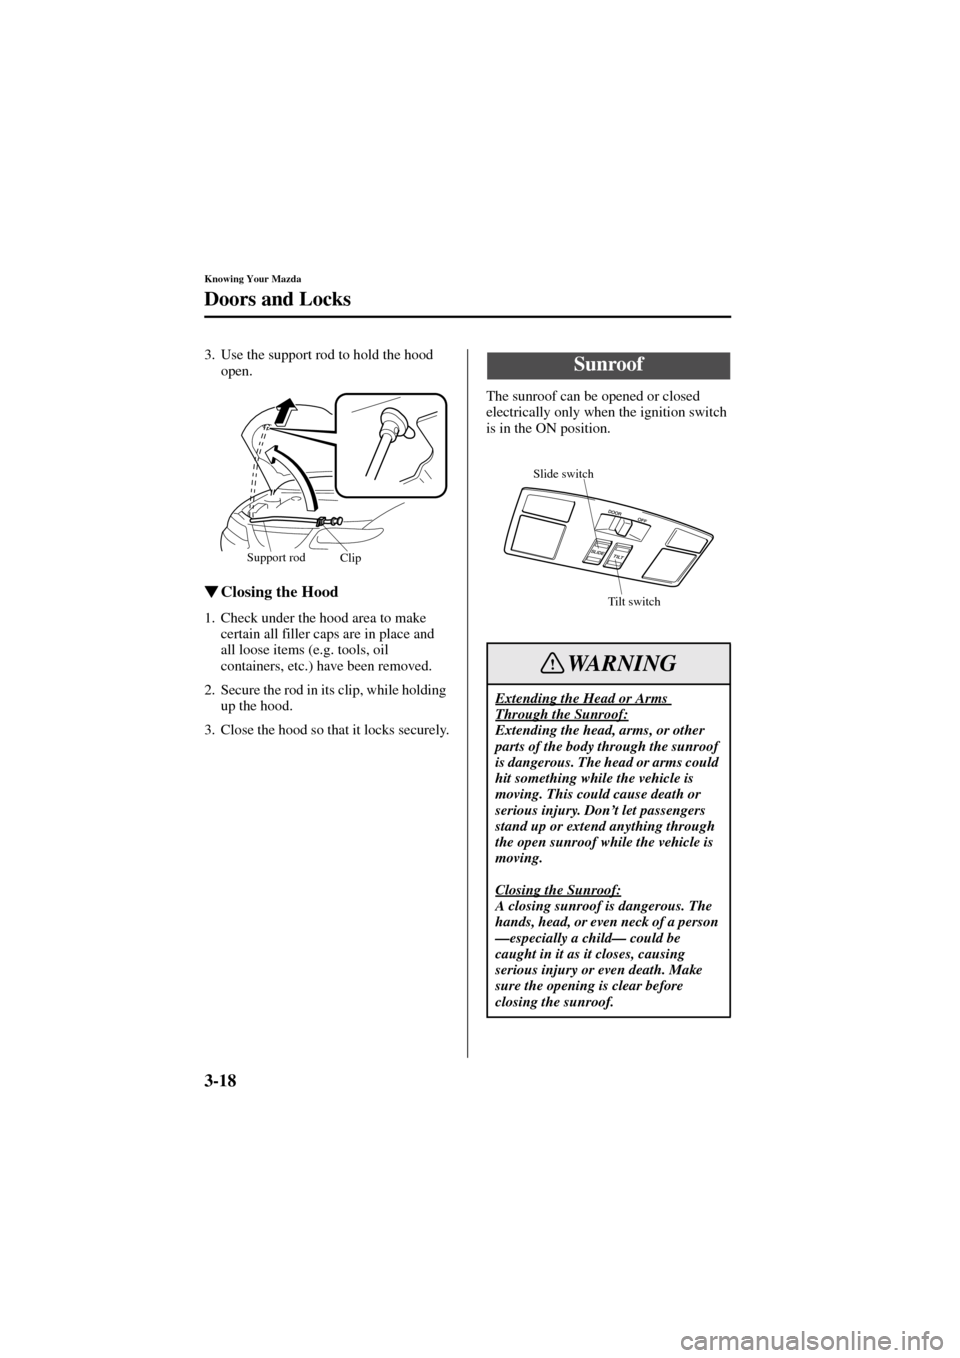 MAZDA MODEL 6 2004   (in English) Service Manual 3-18
Knowing Your Mazda
Doors and Locks
Form No. 8R29-EA-02I
3. Use the support rod to hold the hood 
open.
Closing the Hood
1. Check under the hood area to make 
certain all filler caps are in place